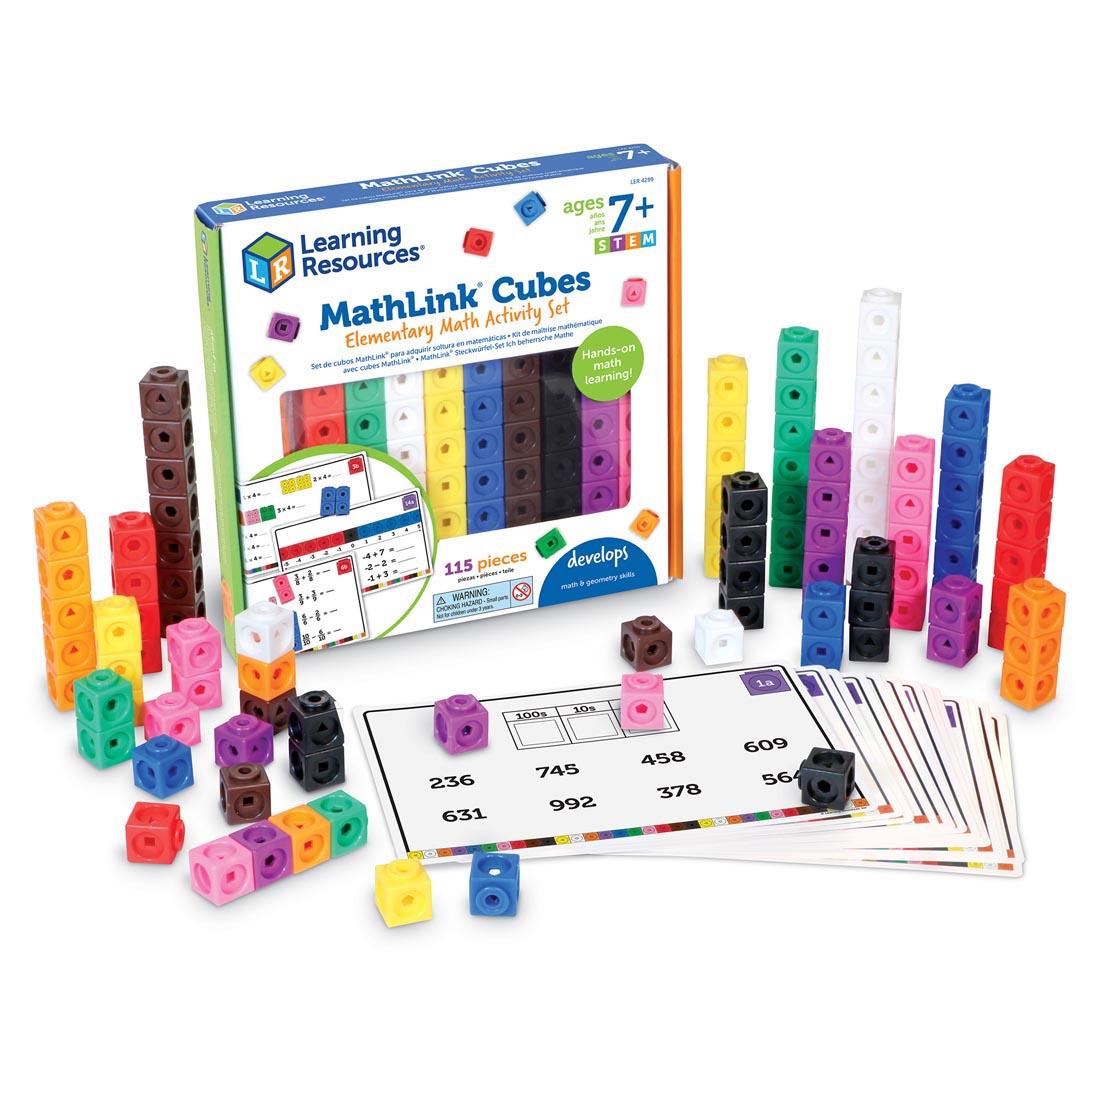 MathLink Cubes Elementary Math Activity Set By Learning Resources with contents shown outside the box